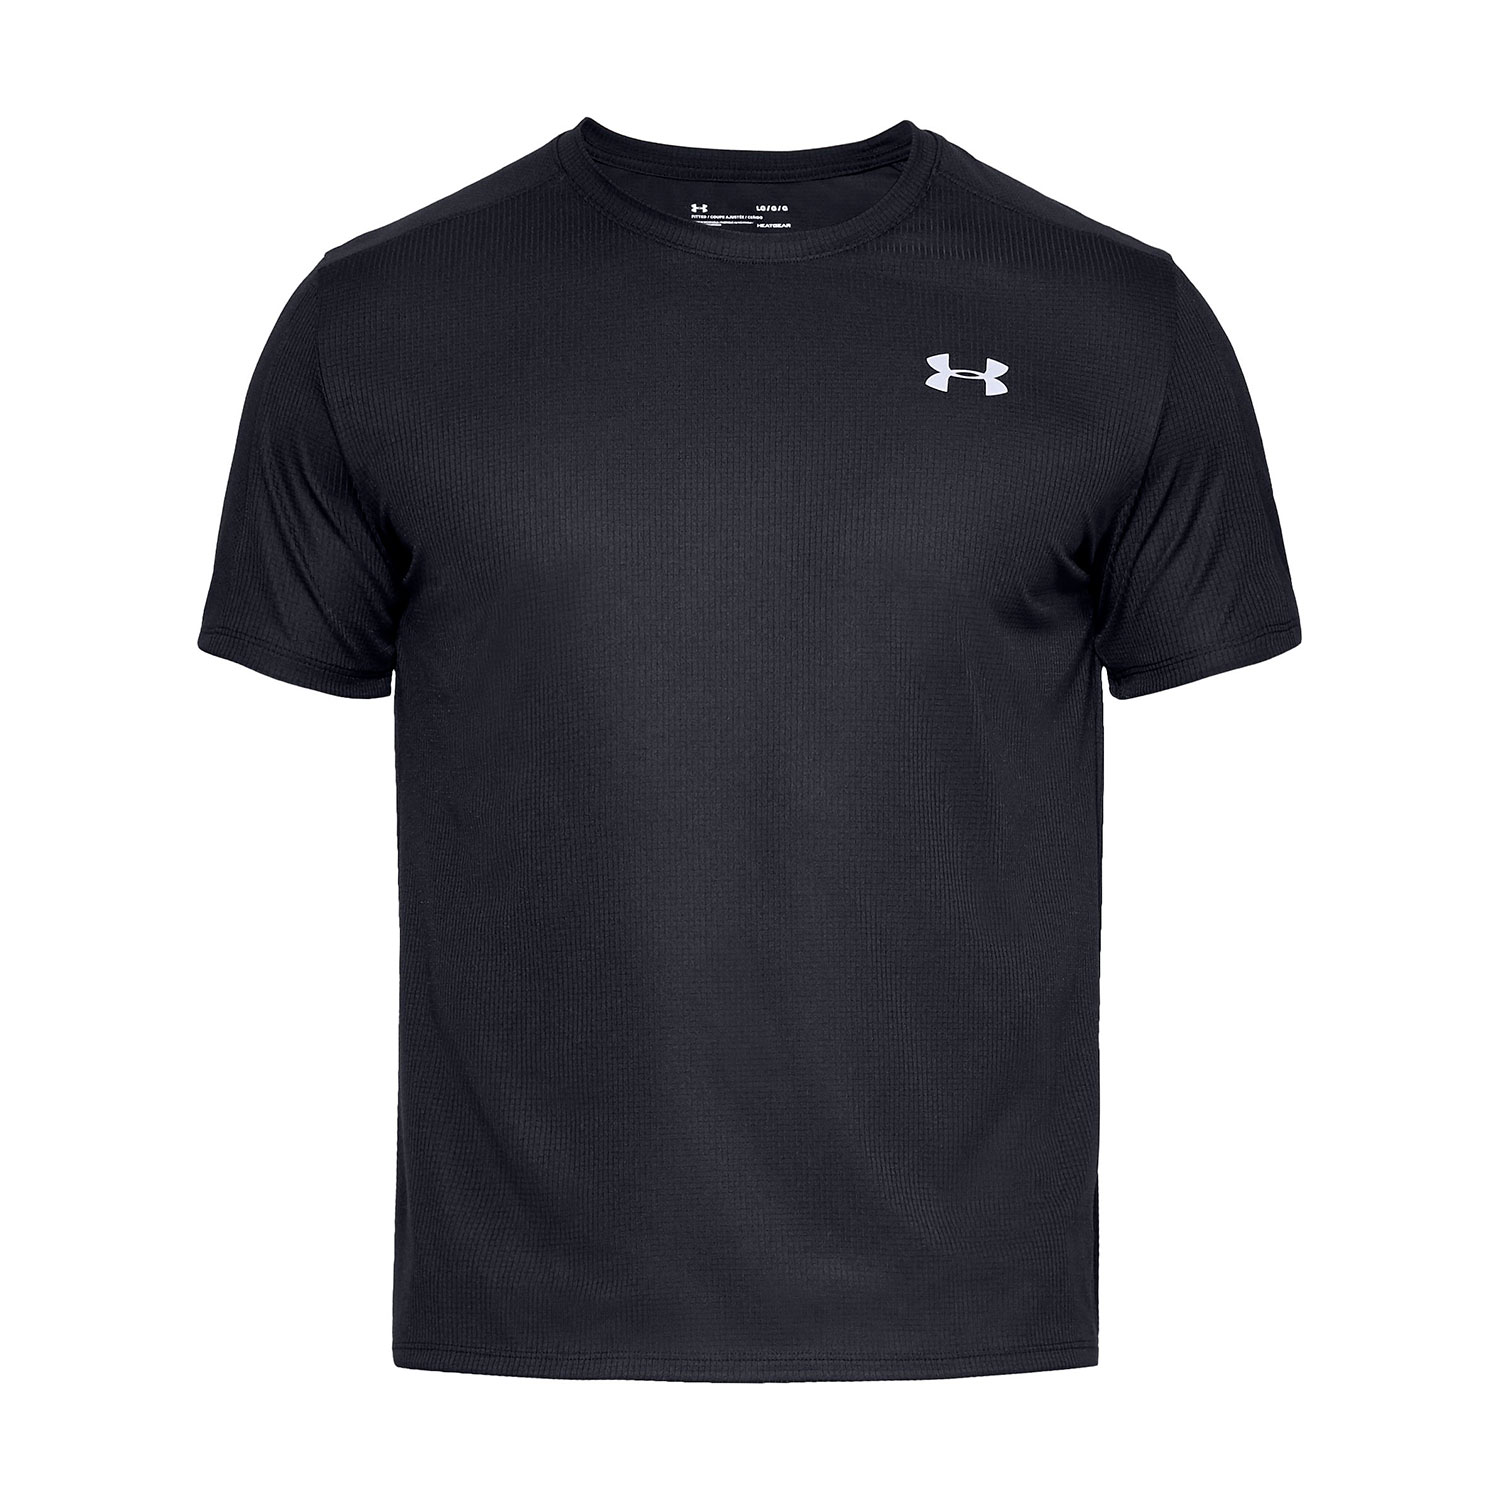 Under Armour T Shirts For Men - almoire